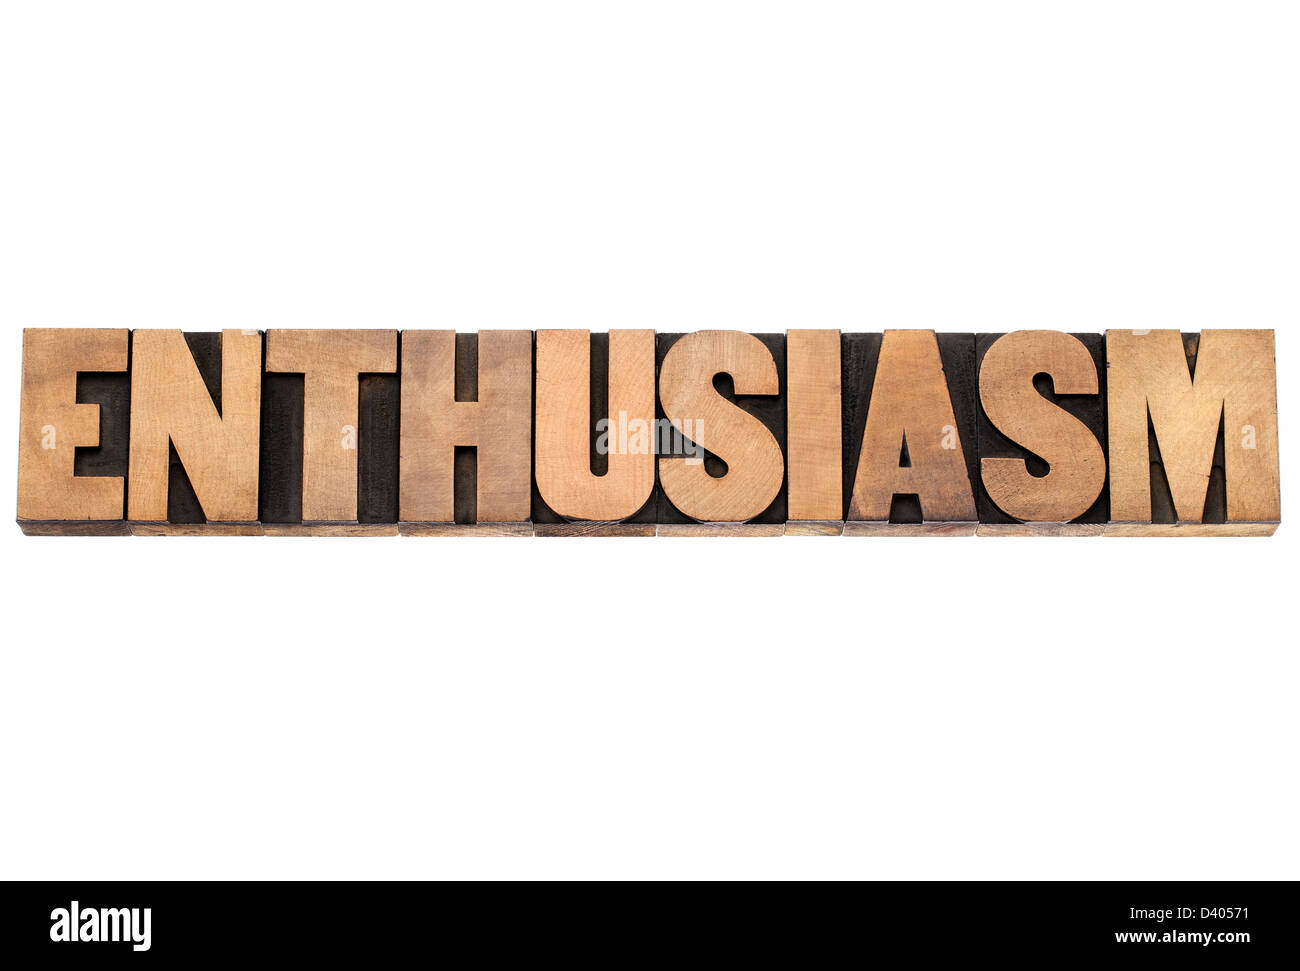 enthusiasm word - isolated text in vintage letterpress wood type printing blocks Stock Photo